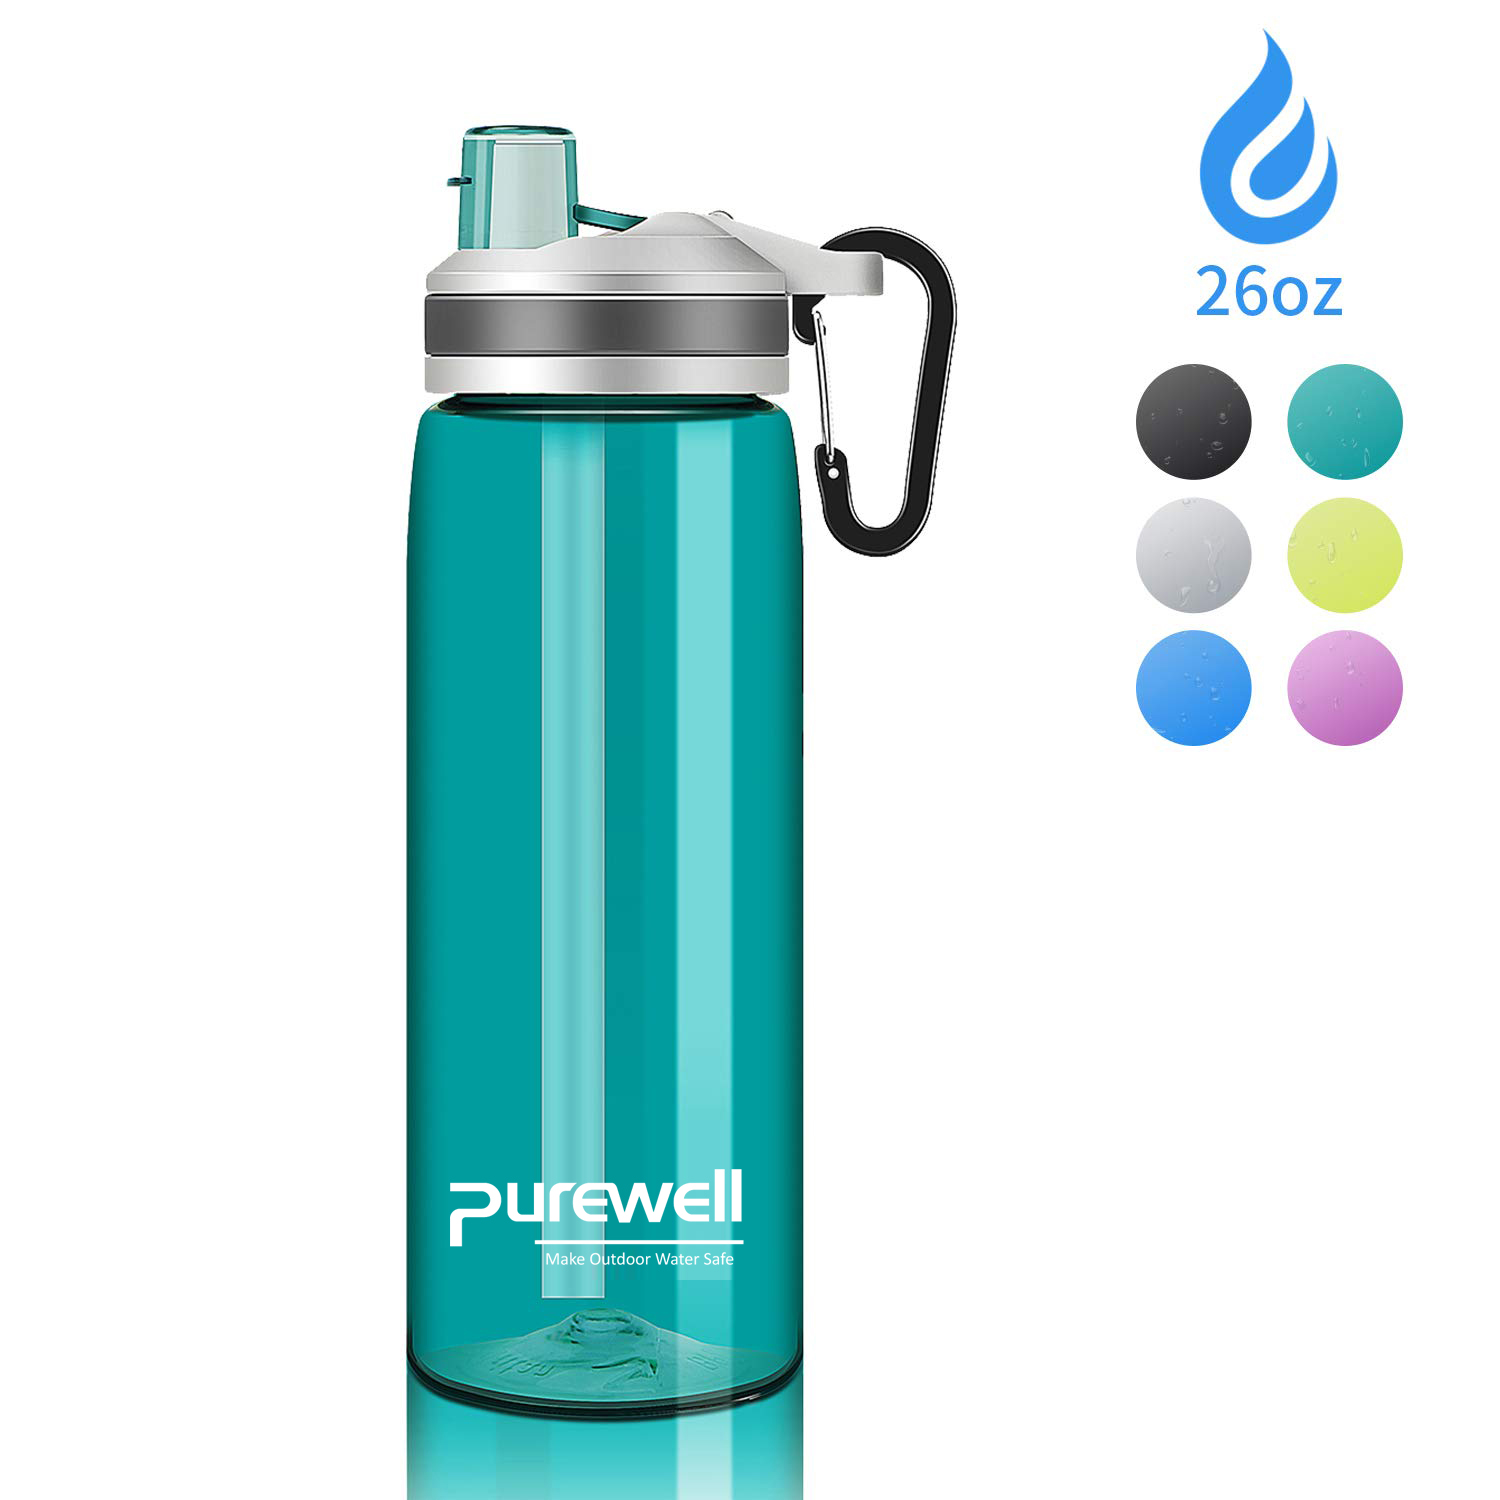 Purewell Array image421